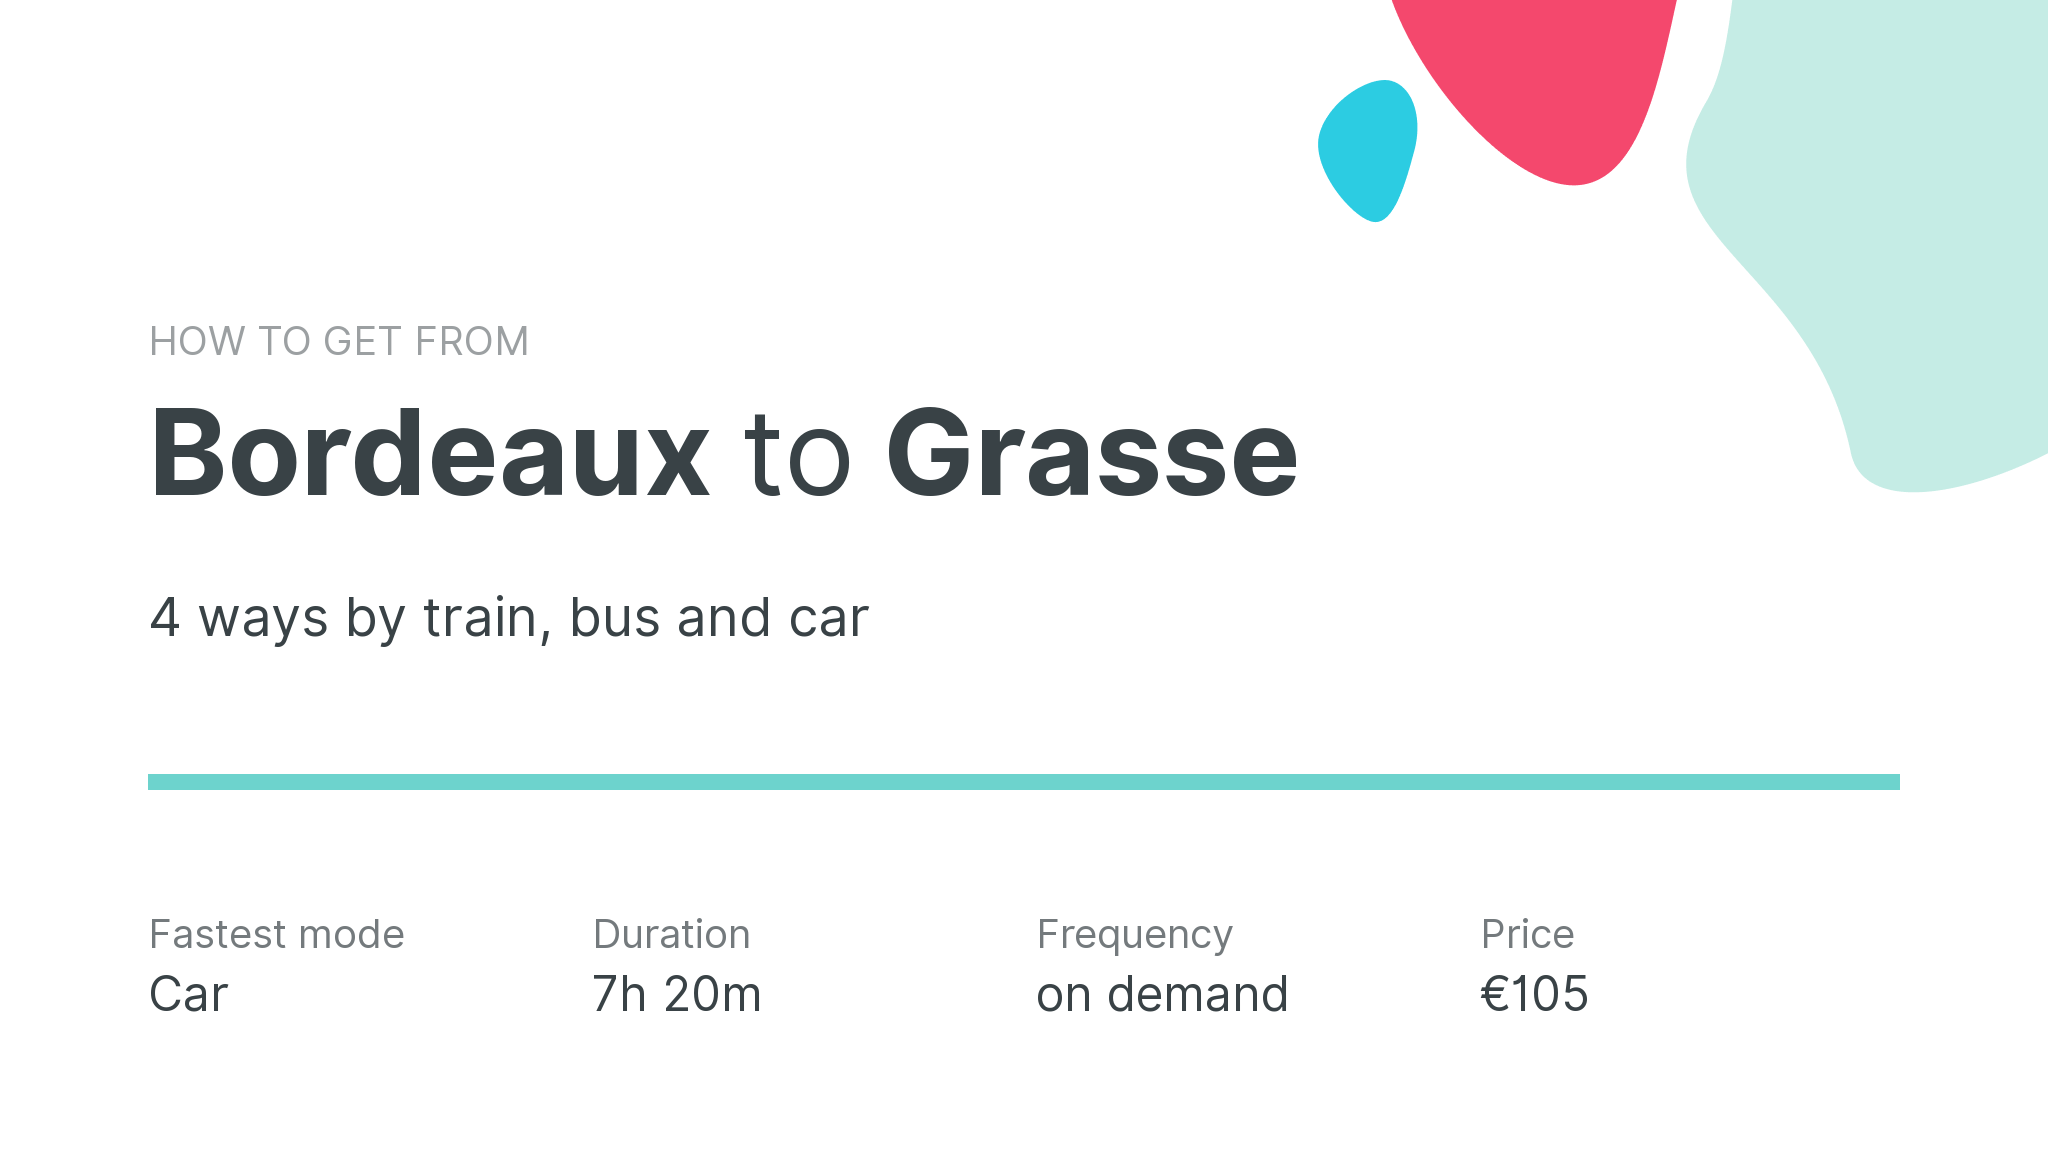 How do I get from Bordeaux to Grasse